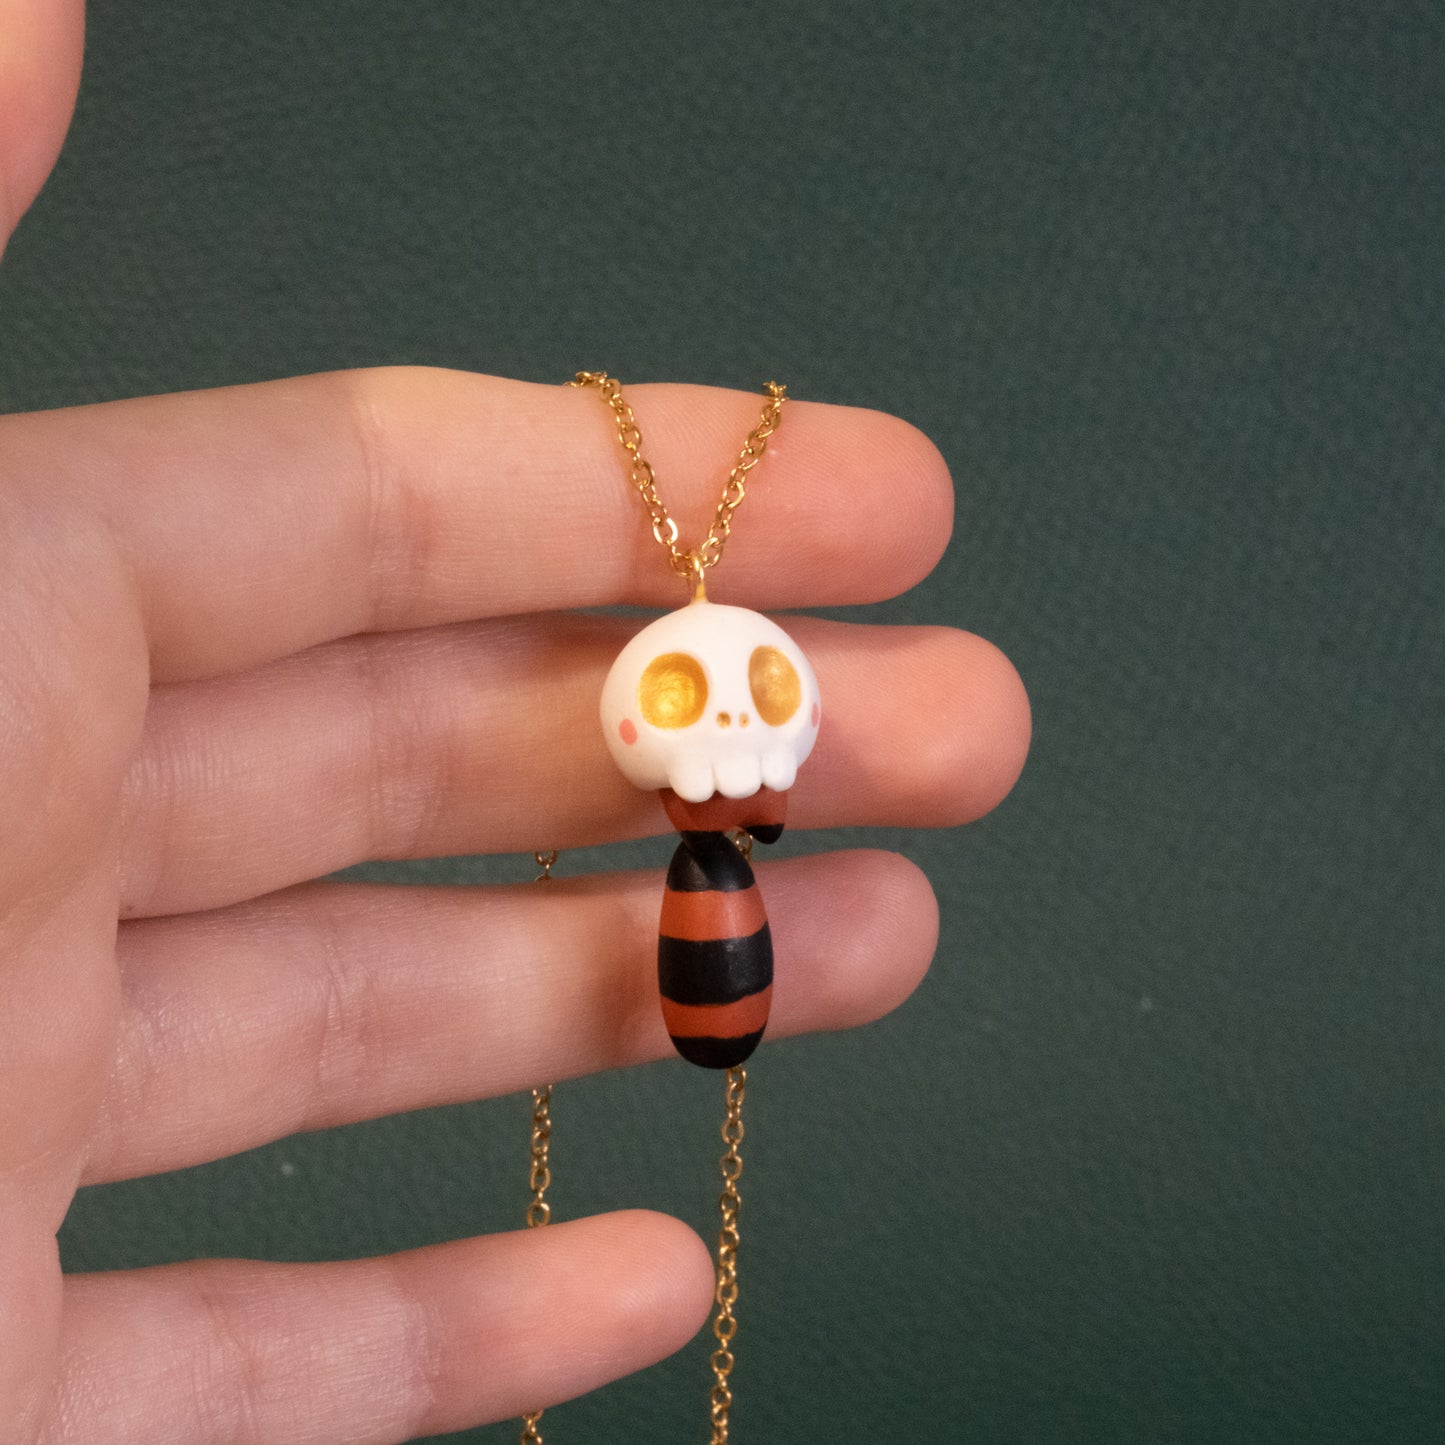 Red Panda Necklace in Polymer Clay